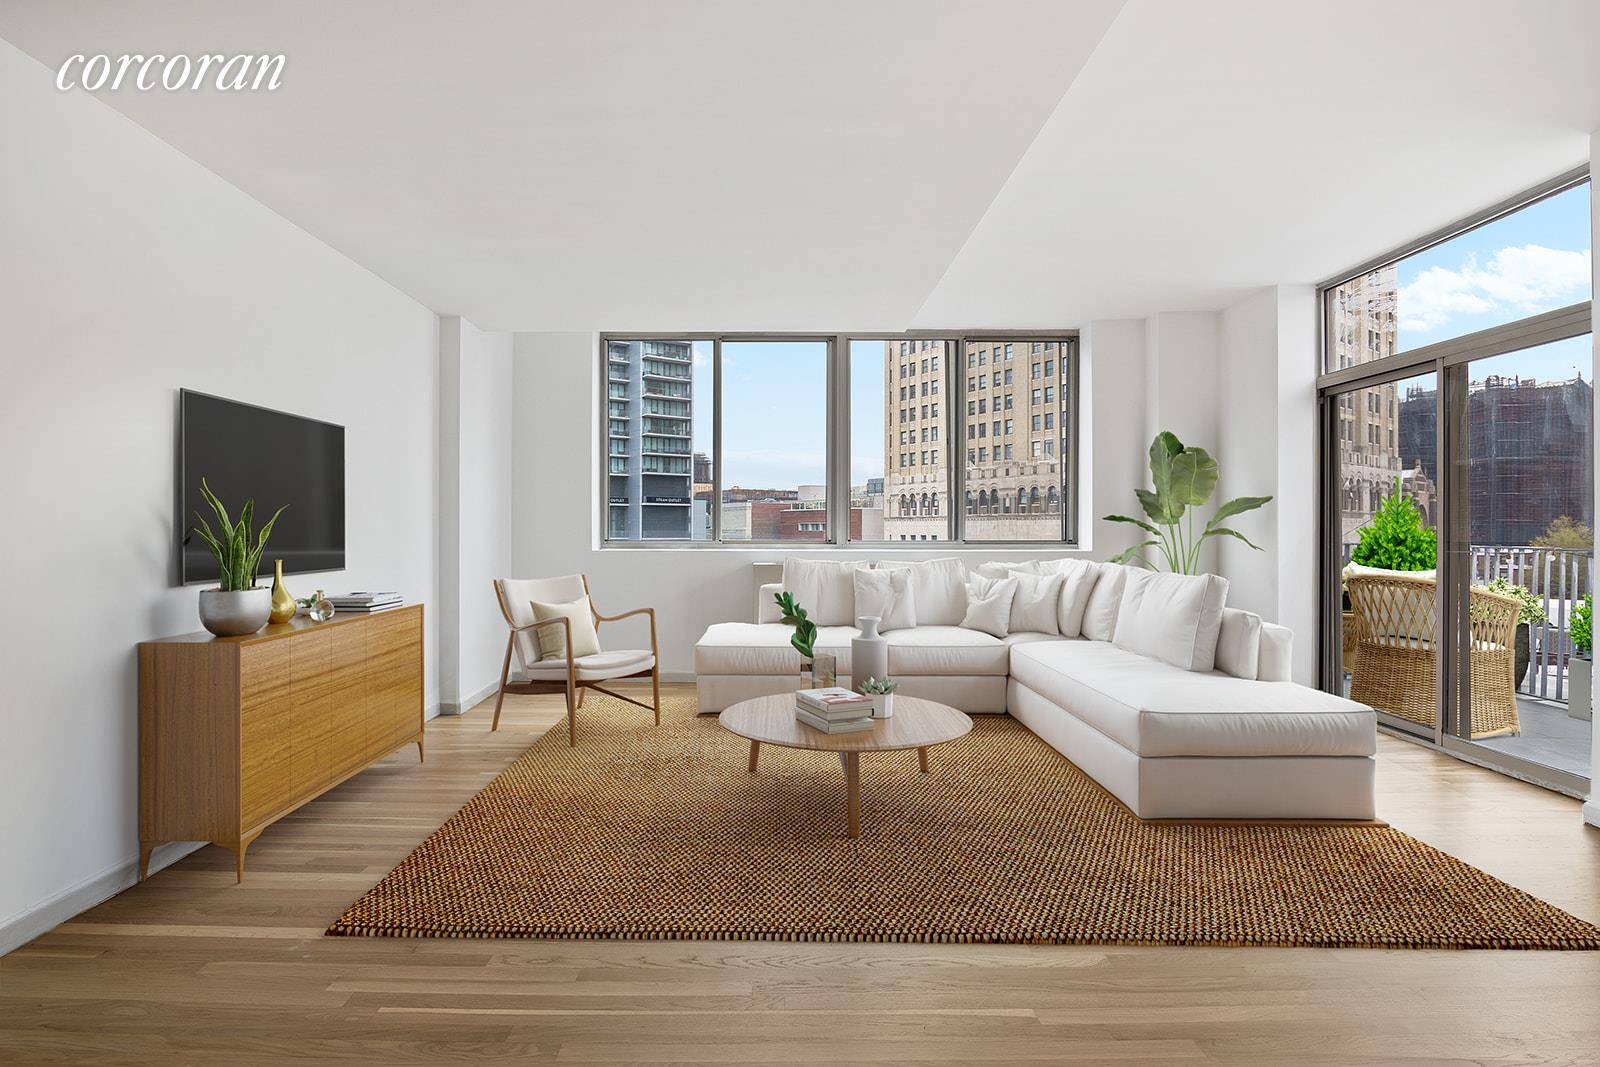 New ! Welcome to 556 State St, a 71 unit, 8 story condominium located in the heart of Boerum Hill.